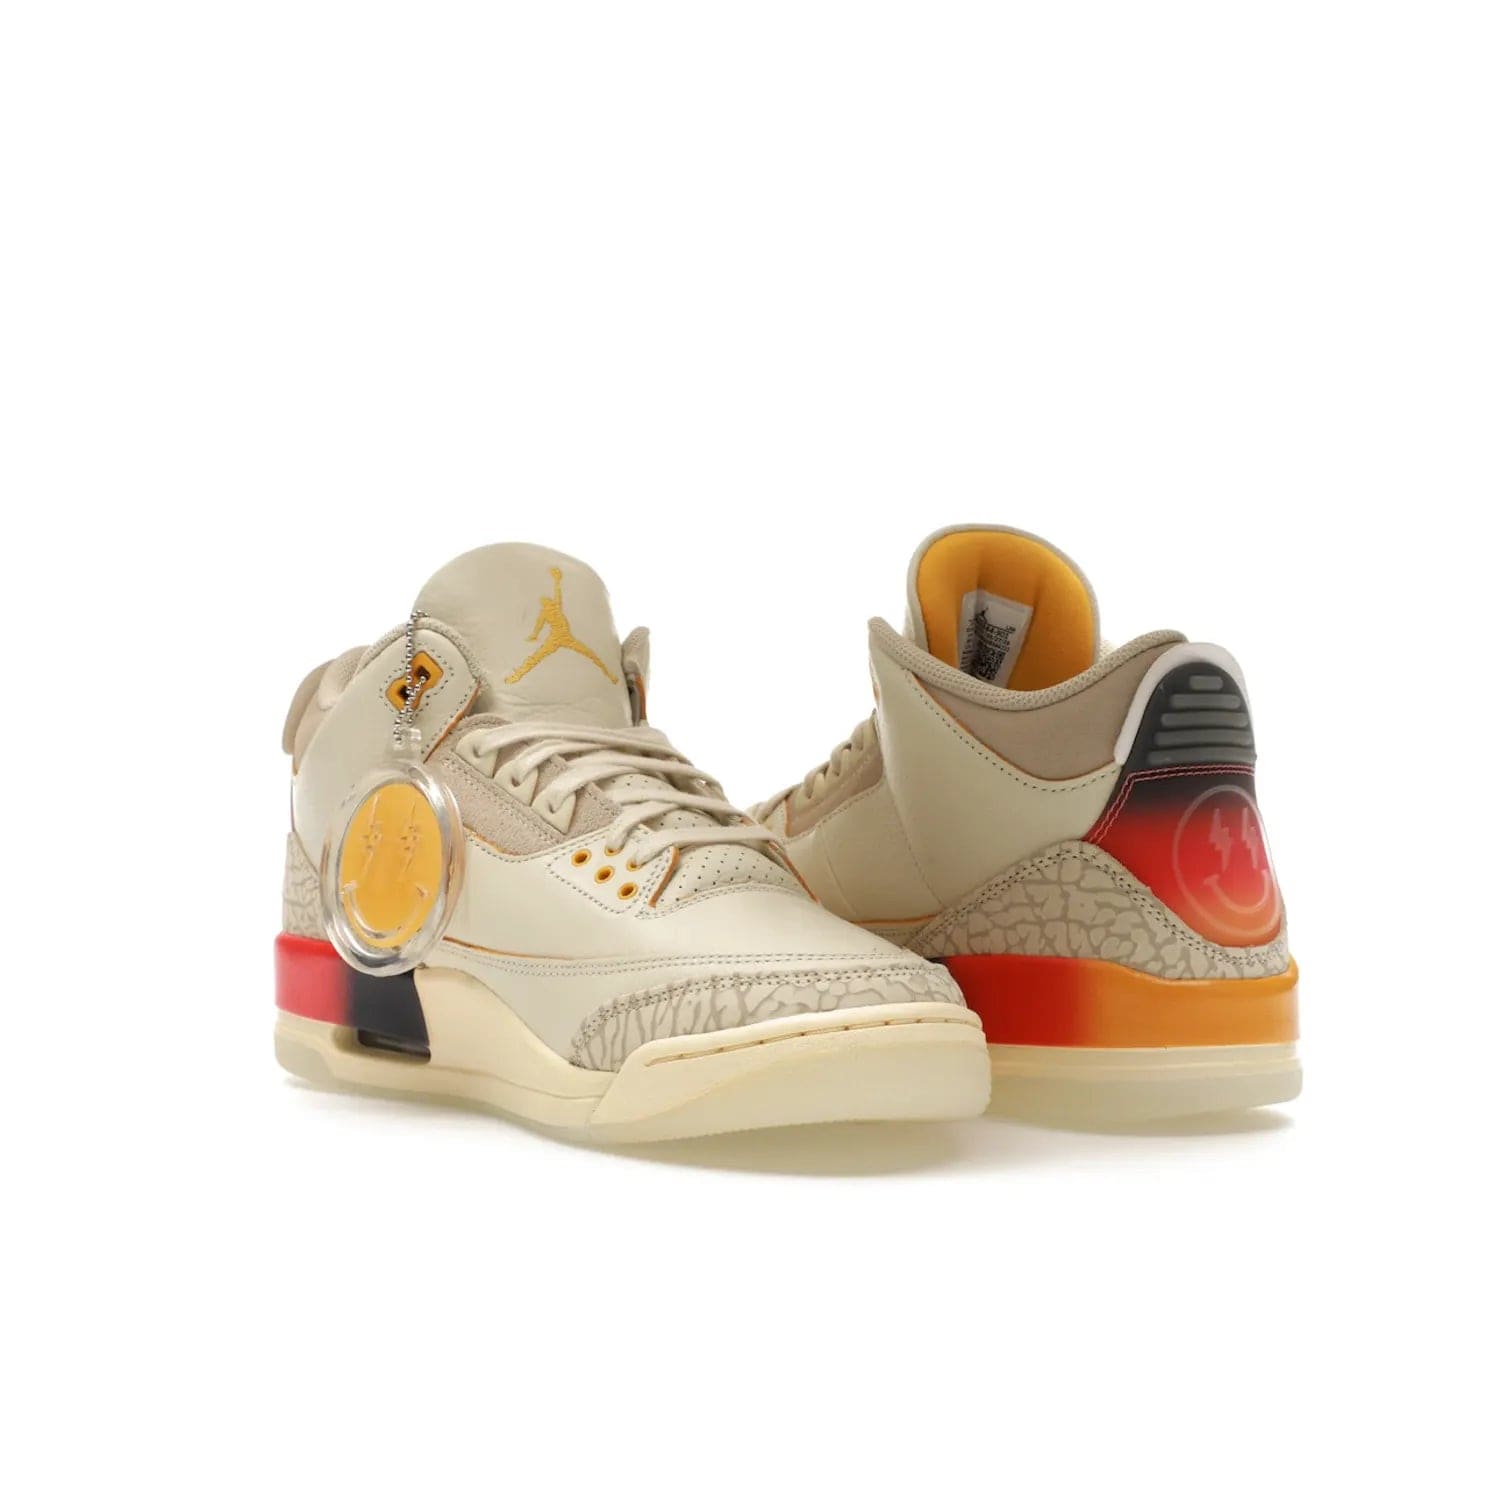 Jordan 3 Retro SP J Balvin Medellín Sunset - Image 24 - Only at www.BallersClubKickz.com - J Balvin x Jordan 3 Retro SP: Celebrate the joy of life with a colorful, homage to the electrifying reggaeton culture and iconic Jordan 3. Limited edition, Sept. 23. $250.